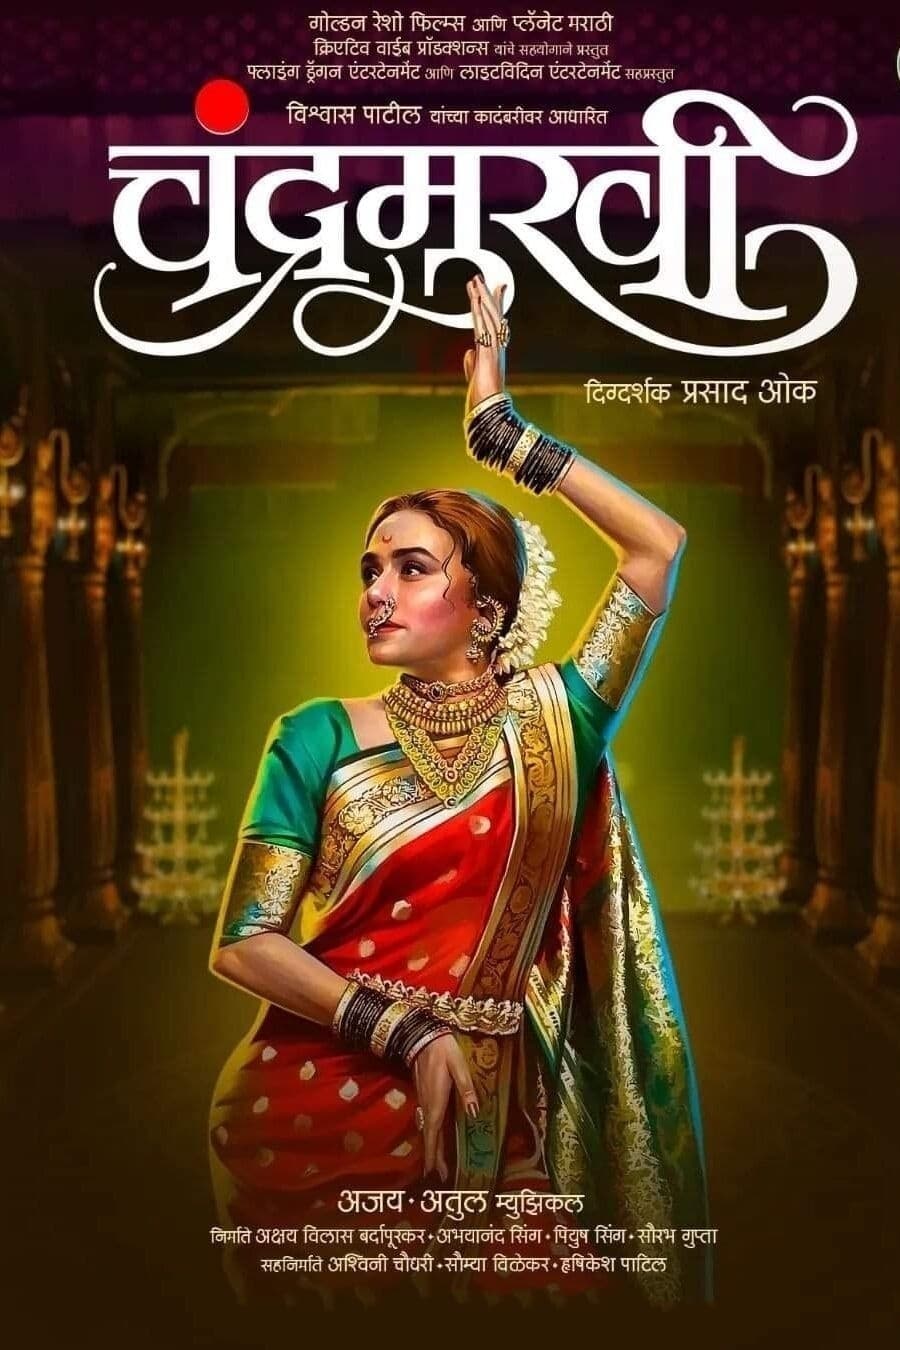 Poster for the movie "Chandramukhi"